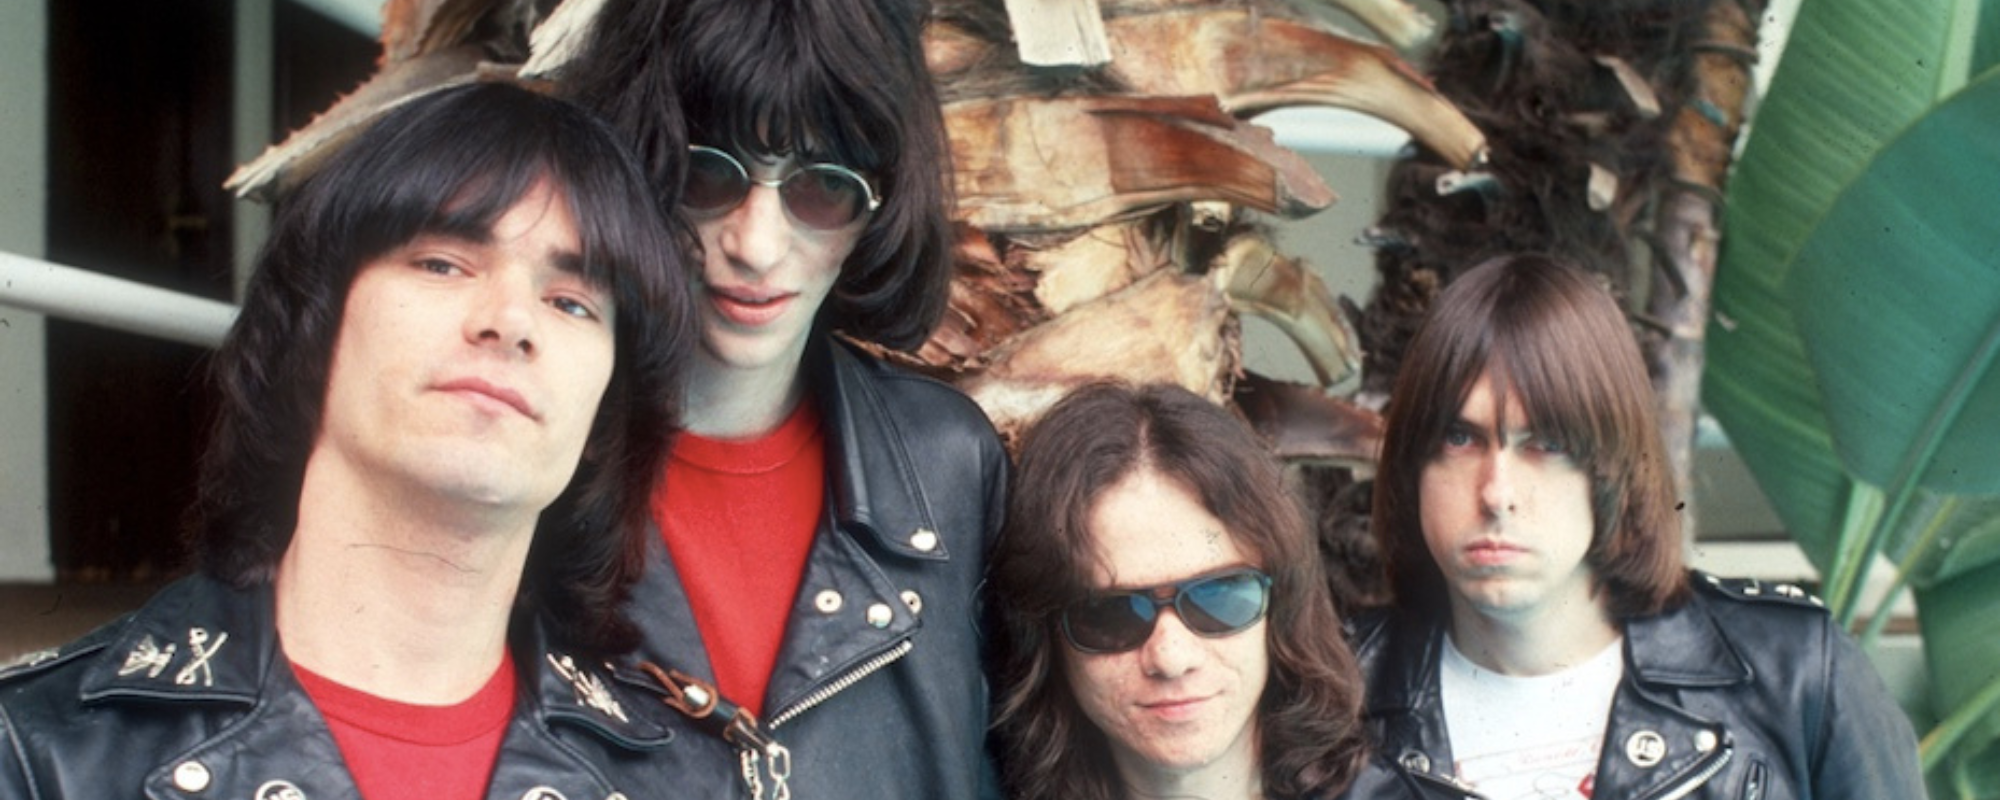 3 Movies Every Ramones Fan Should See